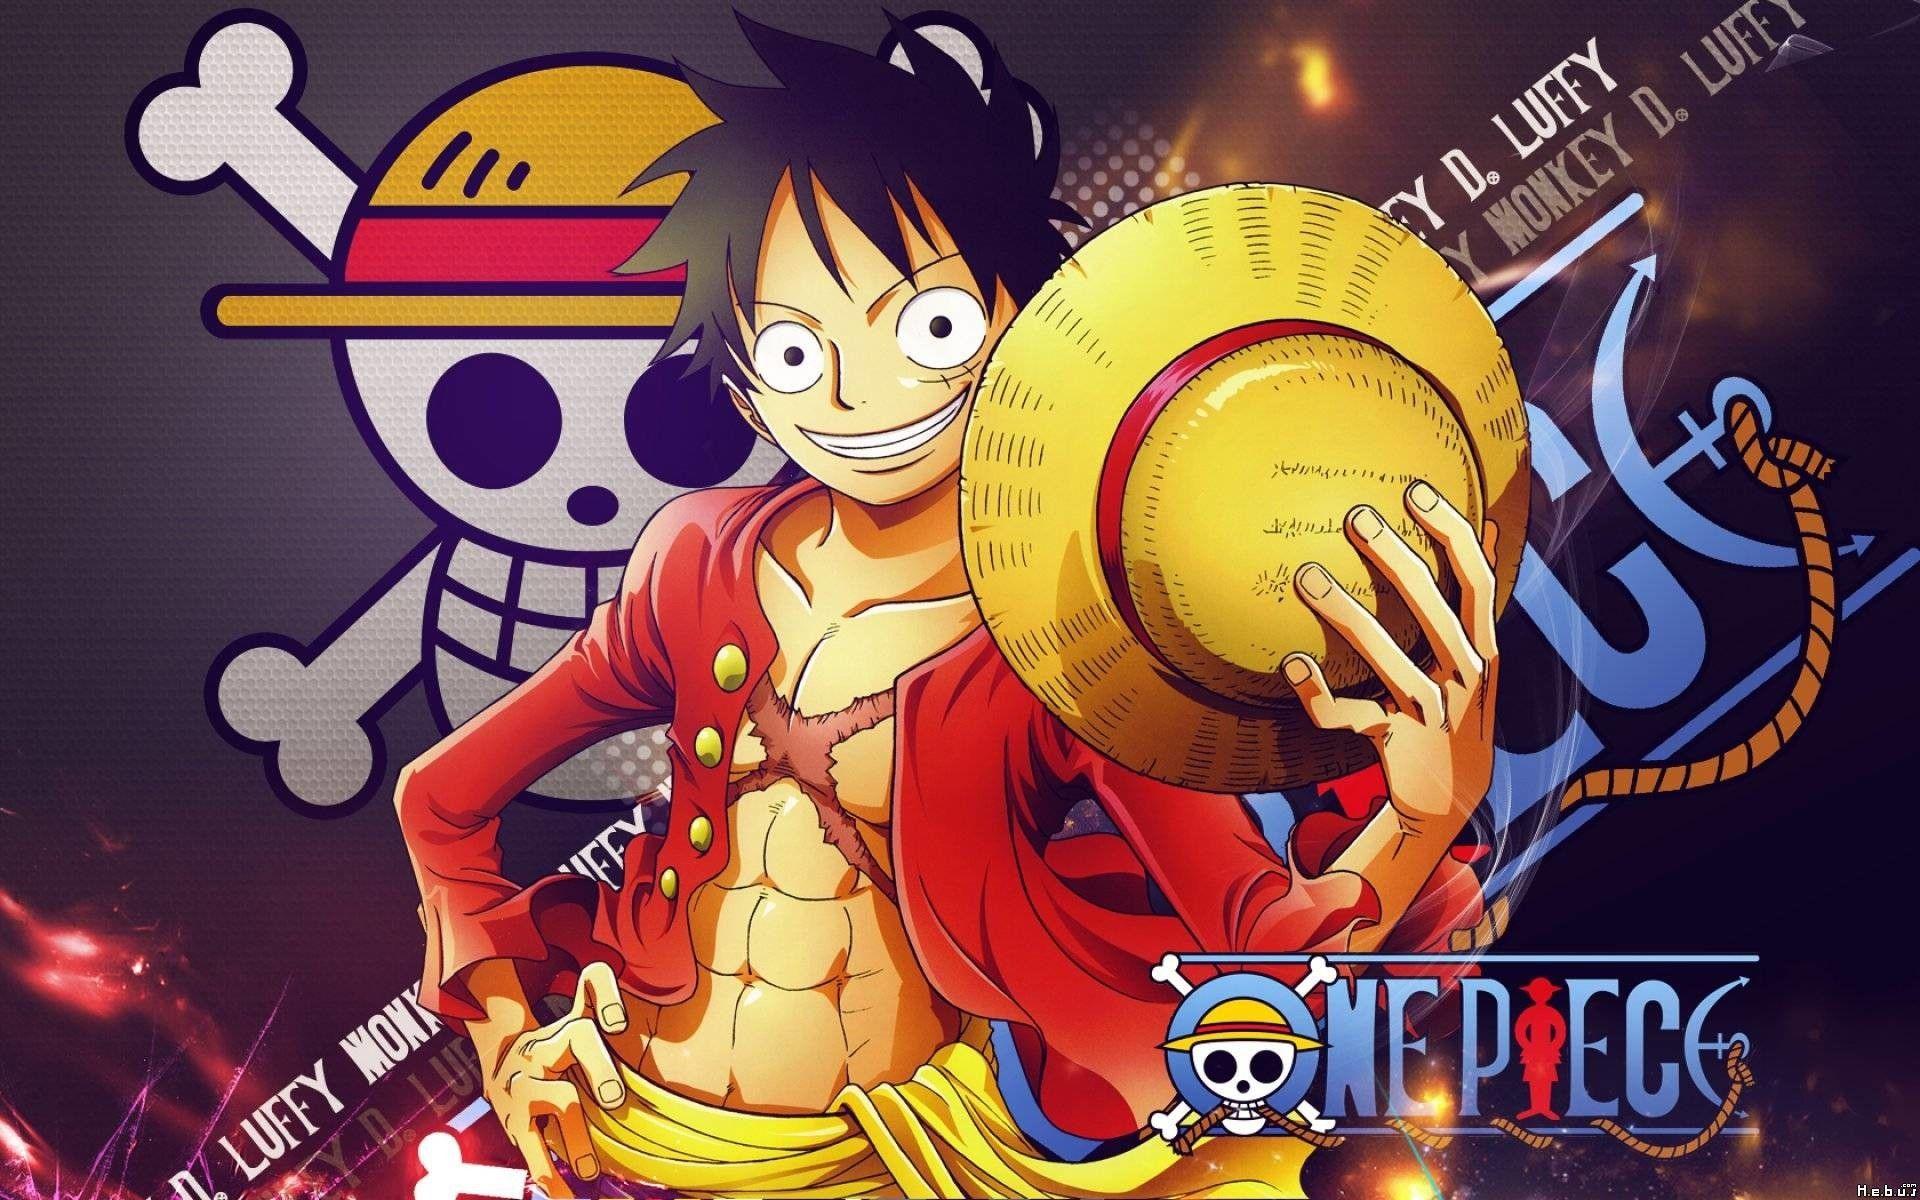 Drawn Flag One Piece Luffy - One Piece Logo Luffy Draw, HD Png Download ,  Transparent Png Image - PNGitem